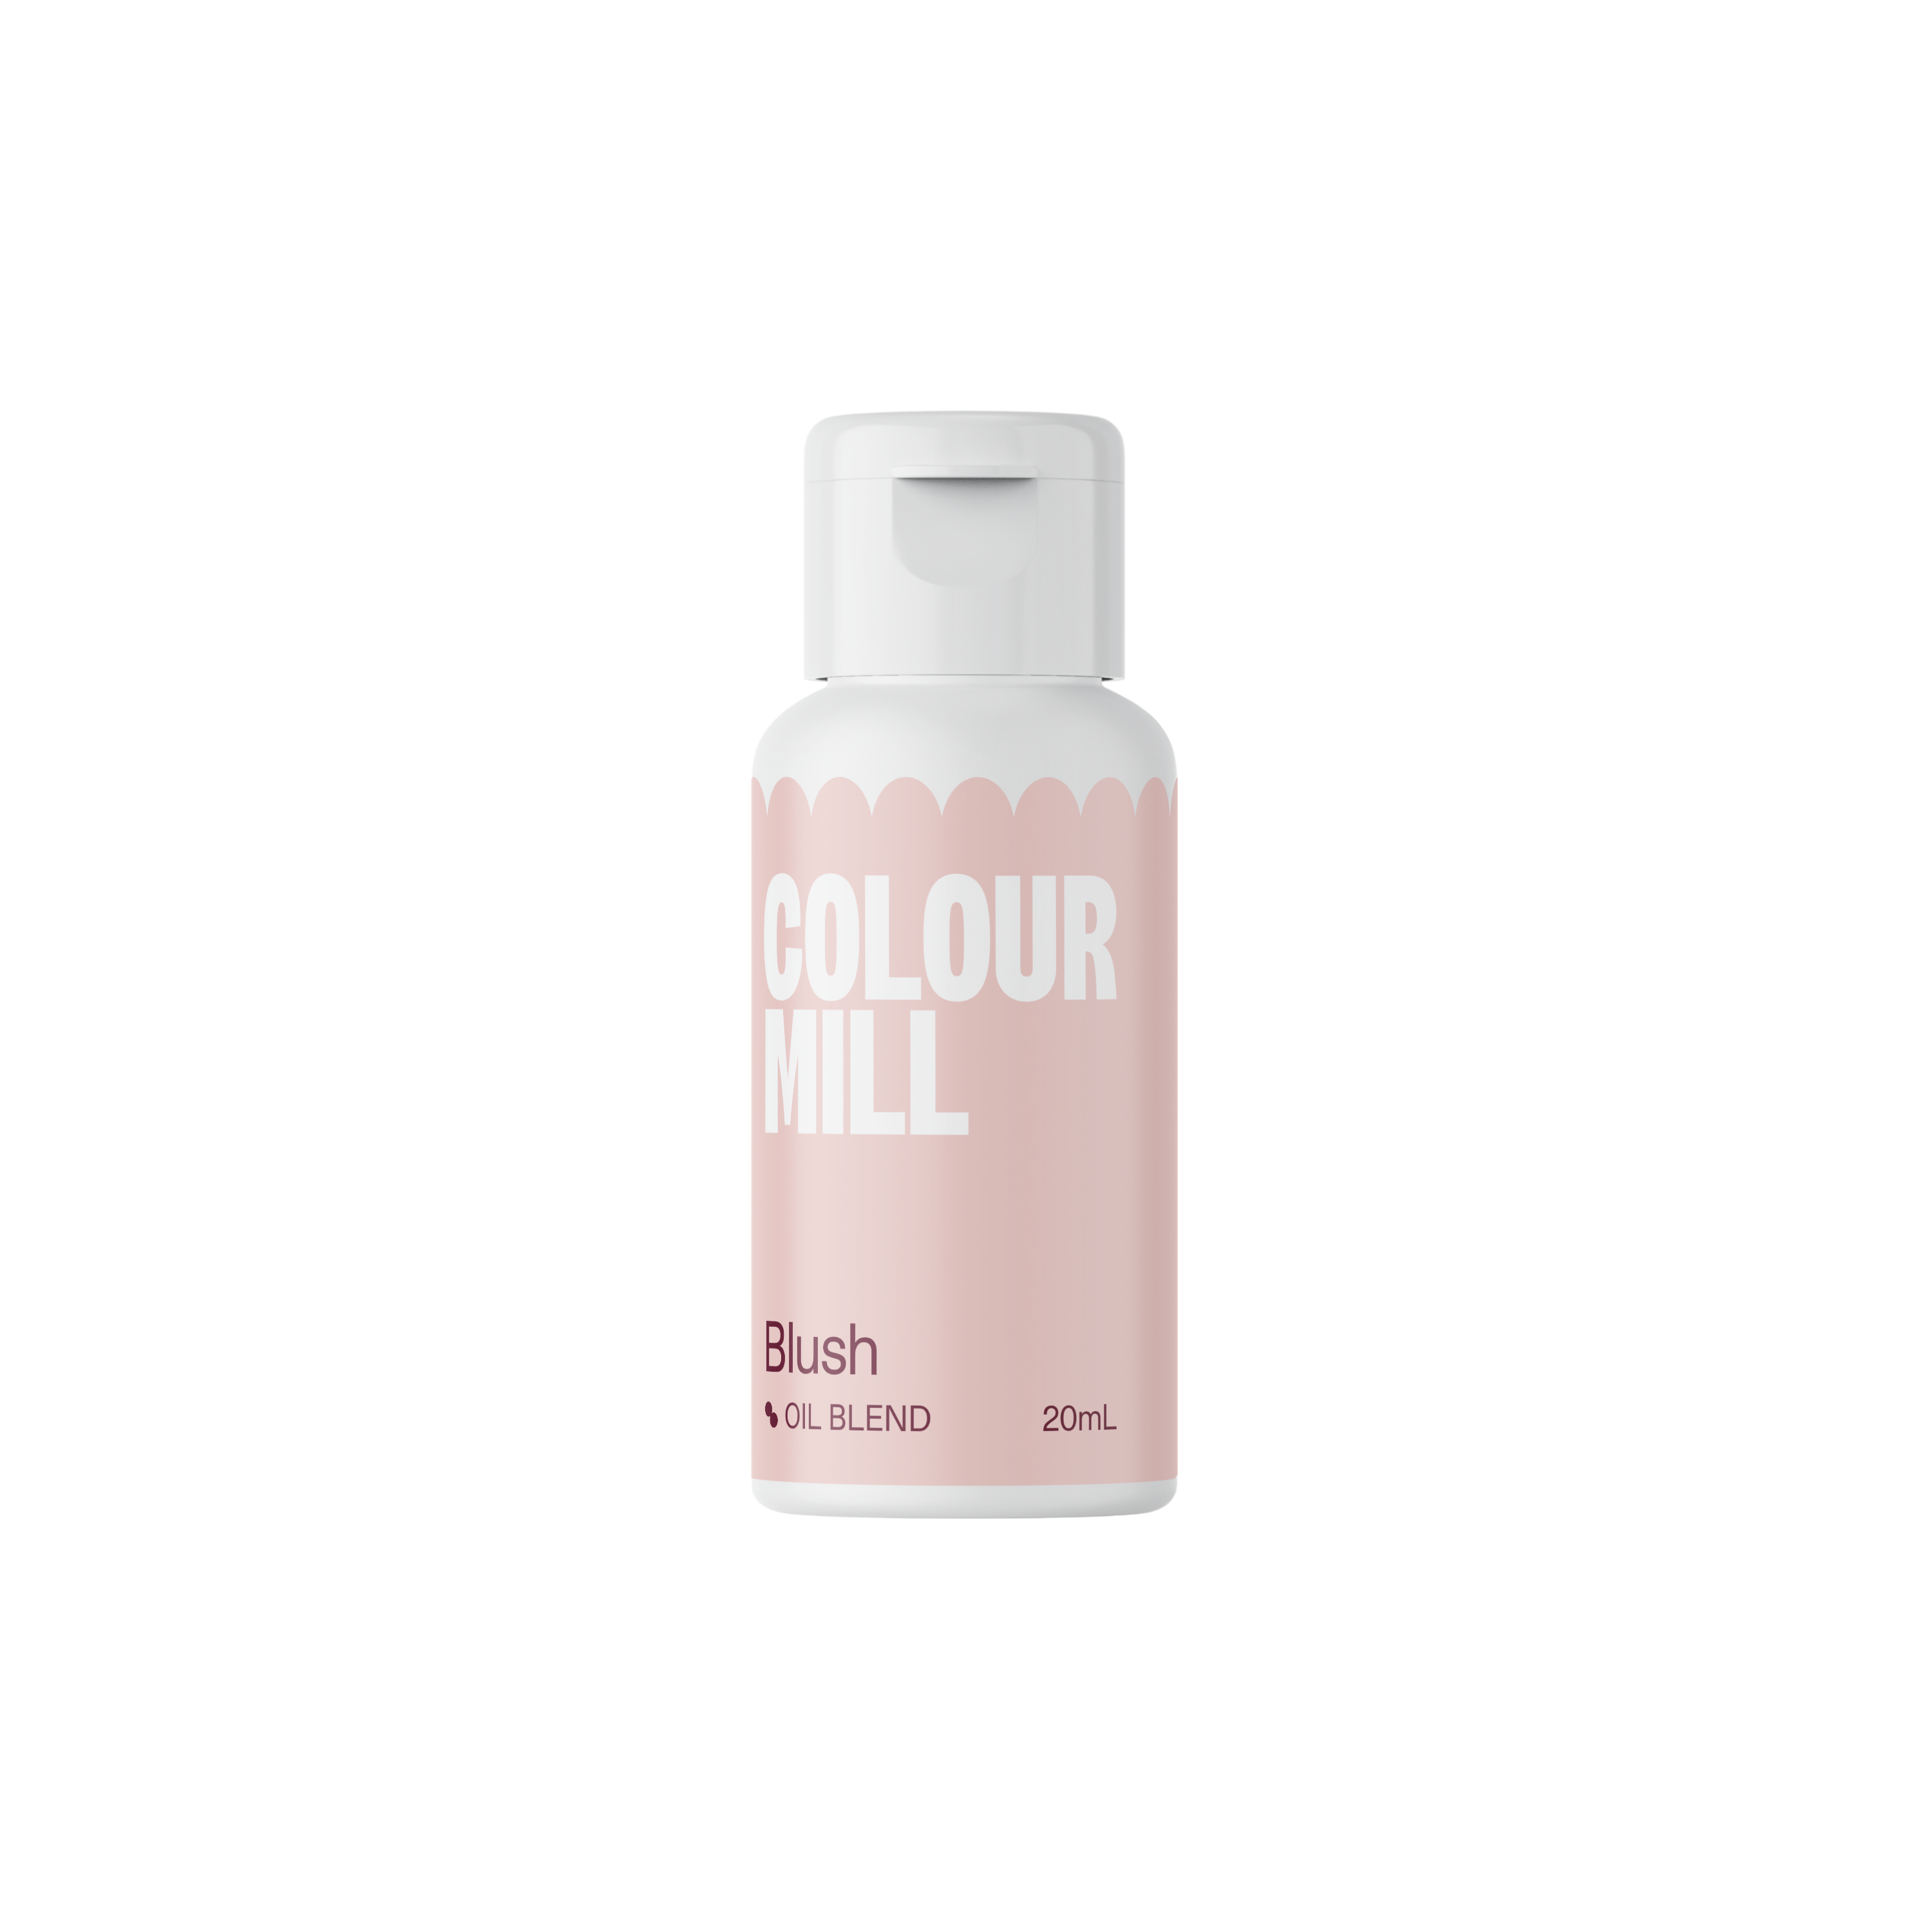 Blush - Oil Blendproduct image